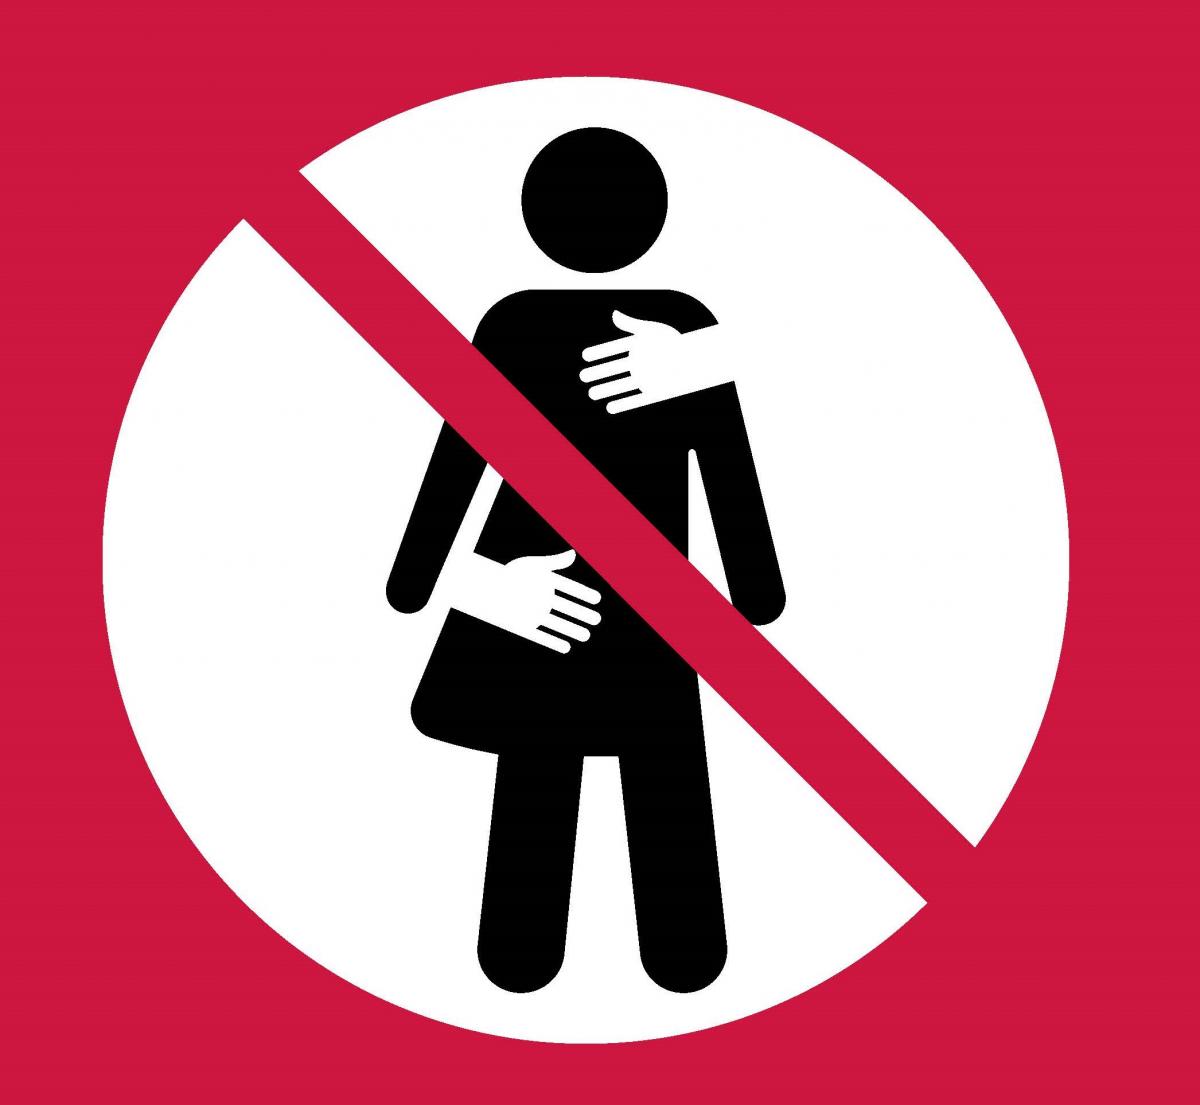 Person figure with hands on its body in the center of a white circle with a red background and red slash-through symbolizing no harassment